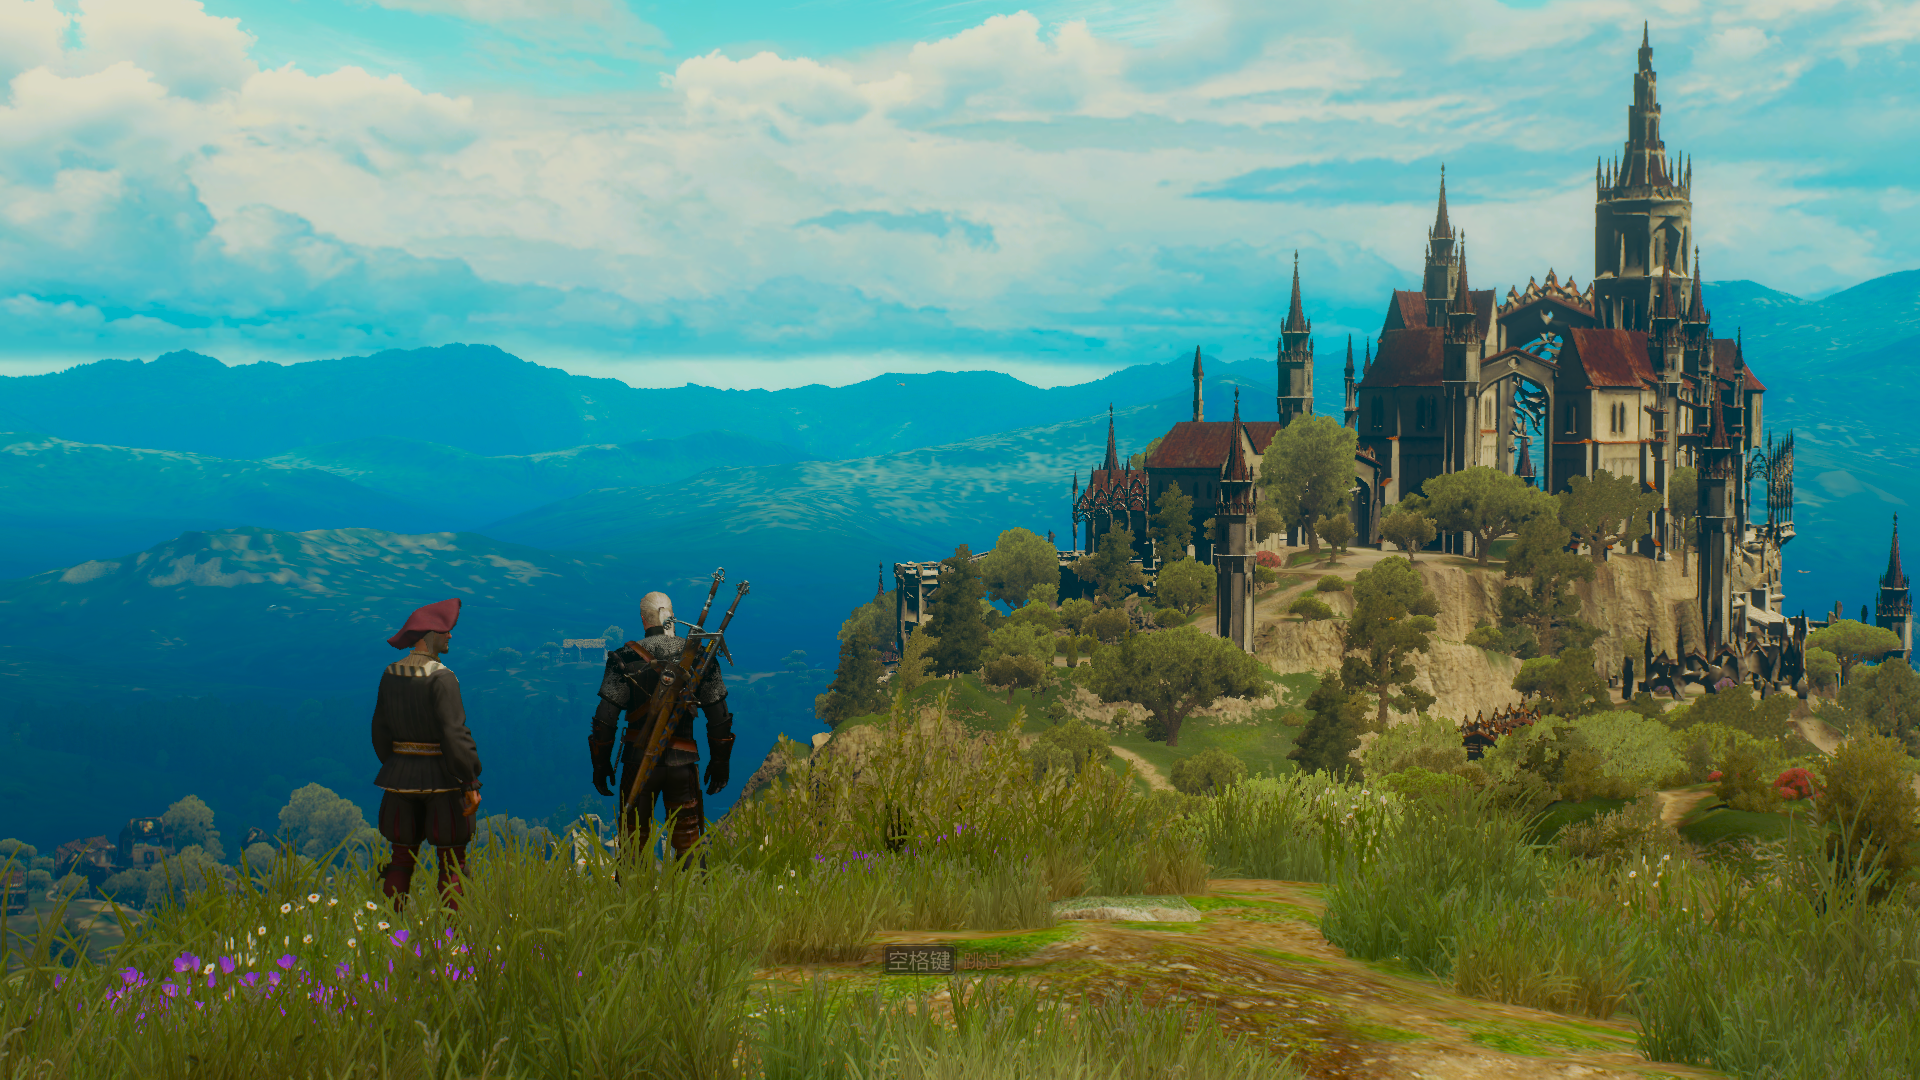 The Witcher 3 Wild Hunt The Witcher 3 Wild Hunt Blood And Wine CD Projekt RED Toussaint Video Game C 1920x1080